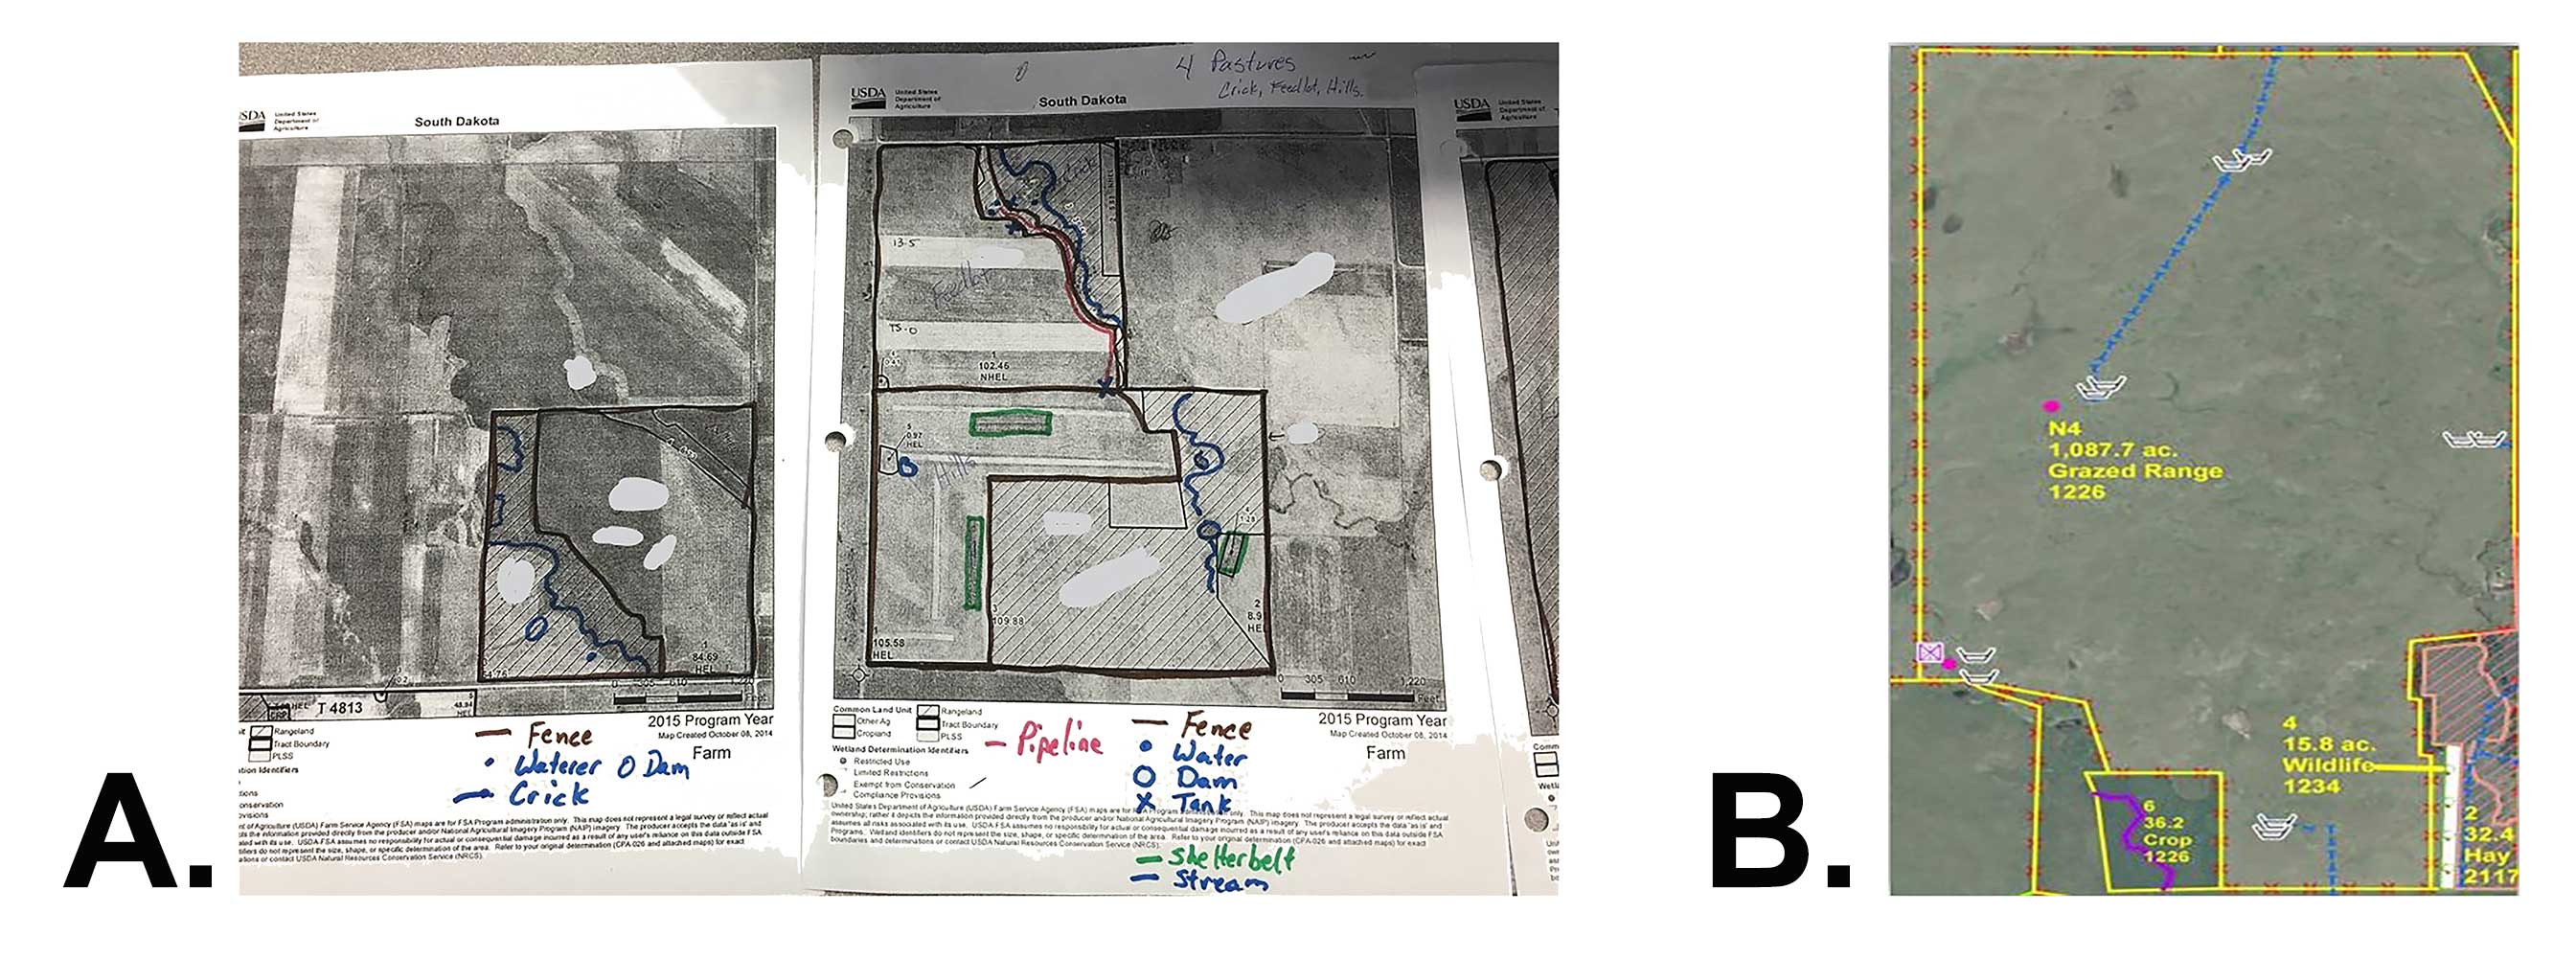 Two ranch inventory maps. This first is labeled "A" and is a hand-drawn map developed from FSA crop-reporting maps. The second is labeled "B" and is a professional map developed by the NRCS. For a complete description, call SDSU Extension at 605-688-6729.